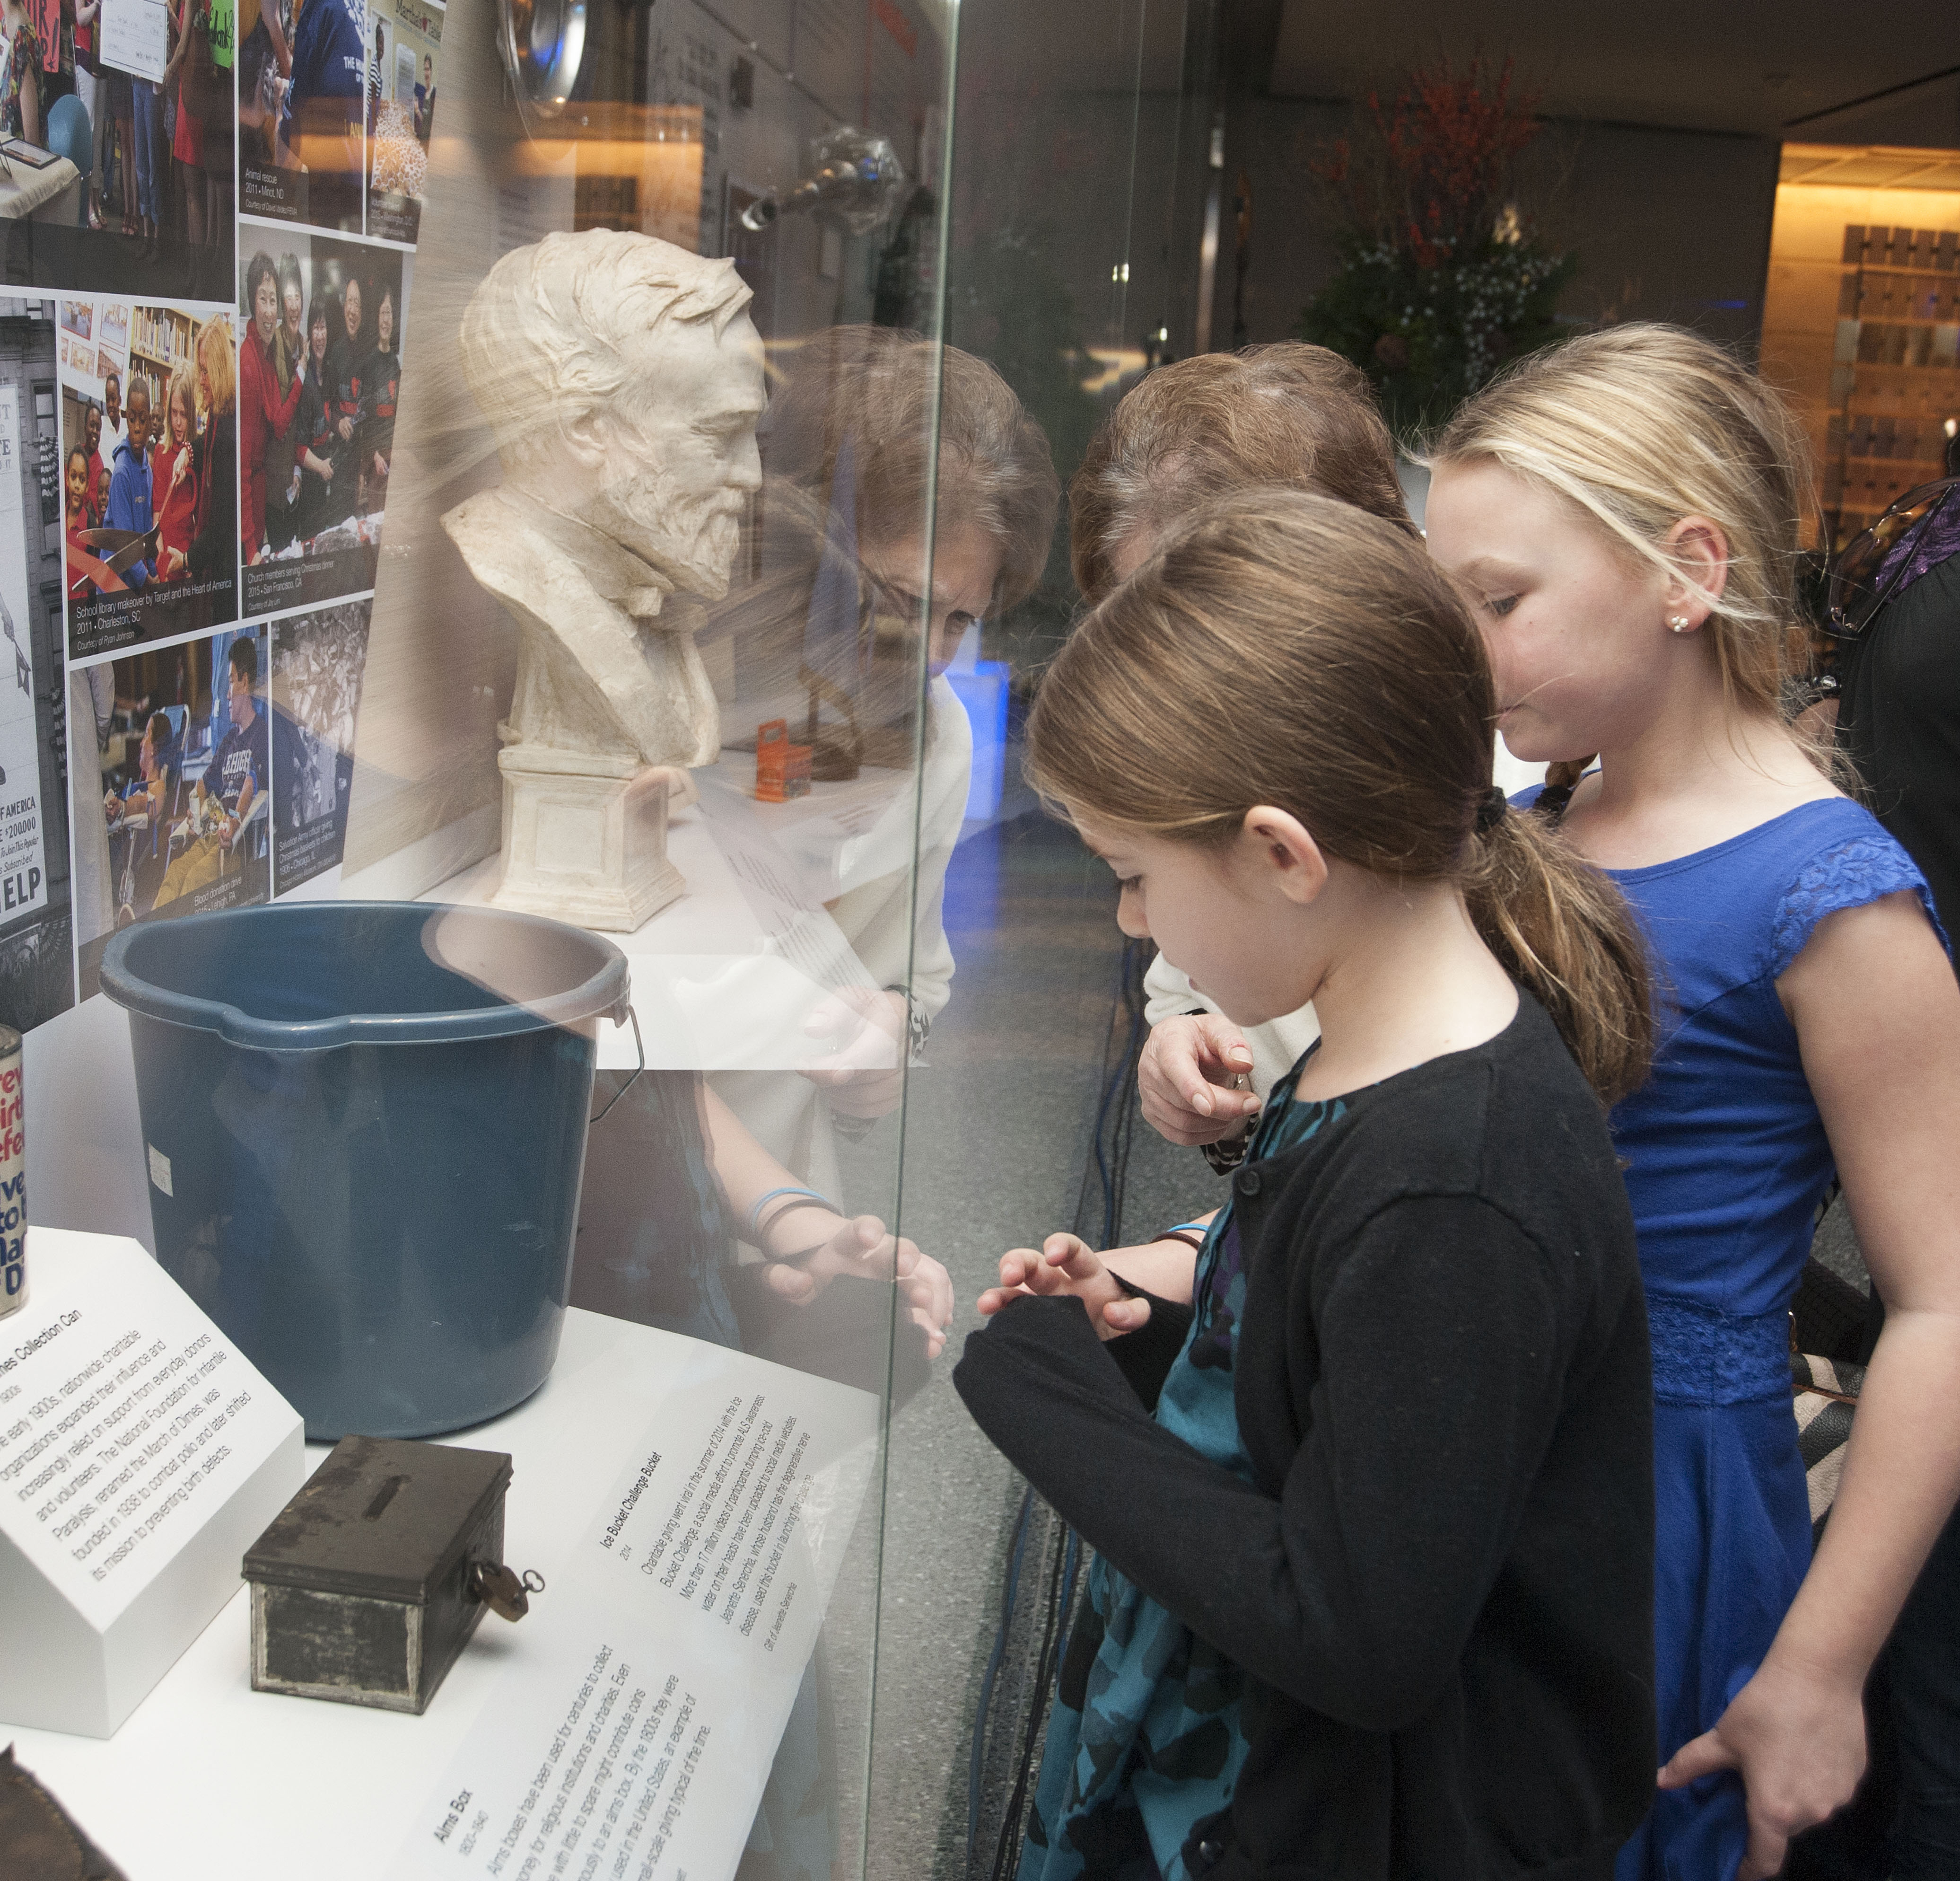 Two young girls look through the glass of a museum display to gaze at a blue bucket among other objects like a pair of boots or a bust of a man.